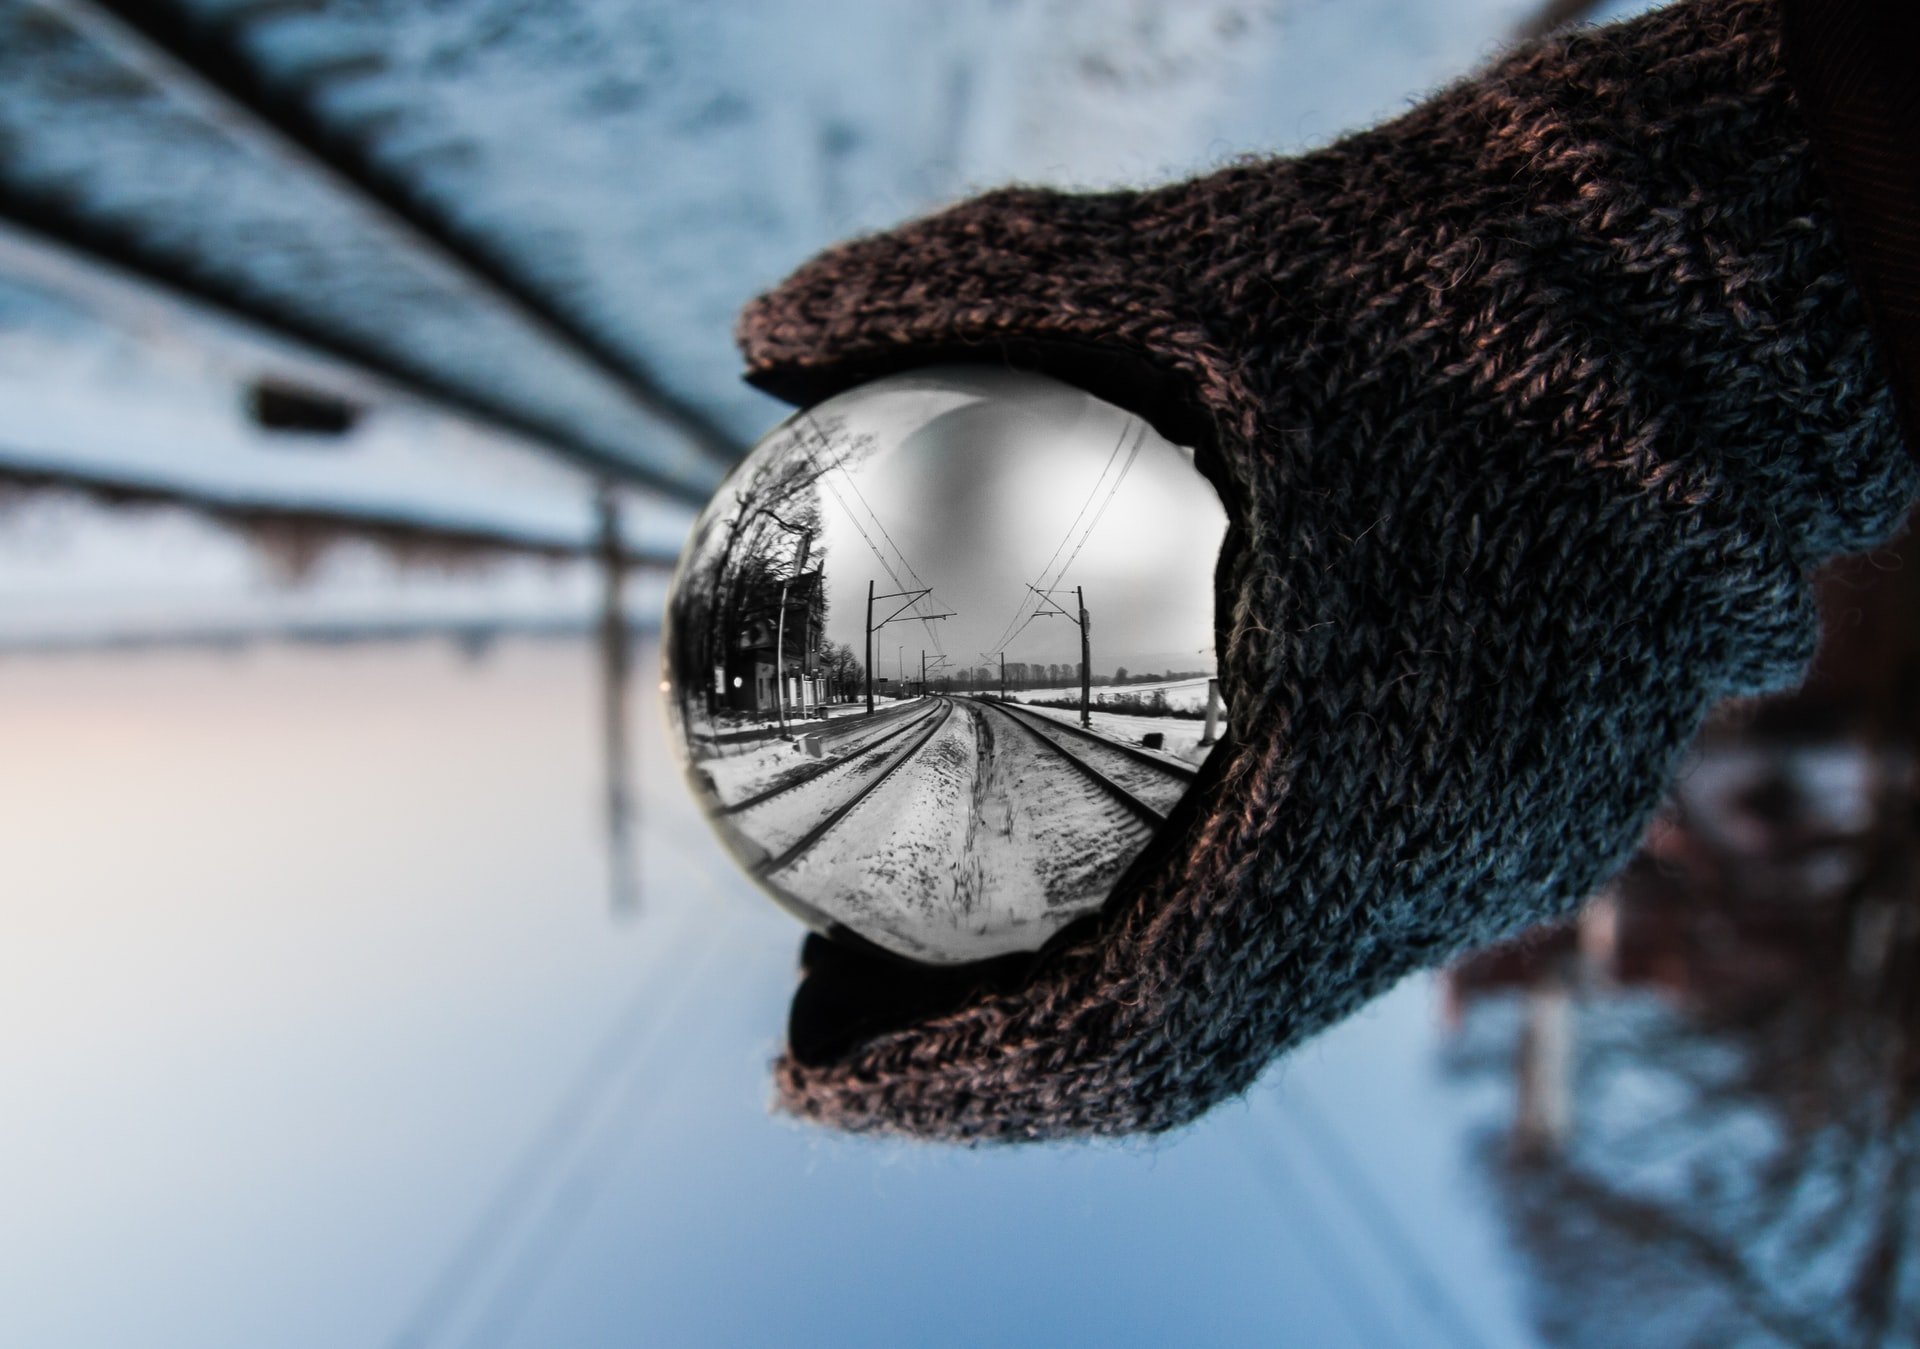 Gloved hand holding a mirrored ball in the snow between two train tracks